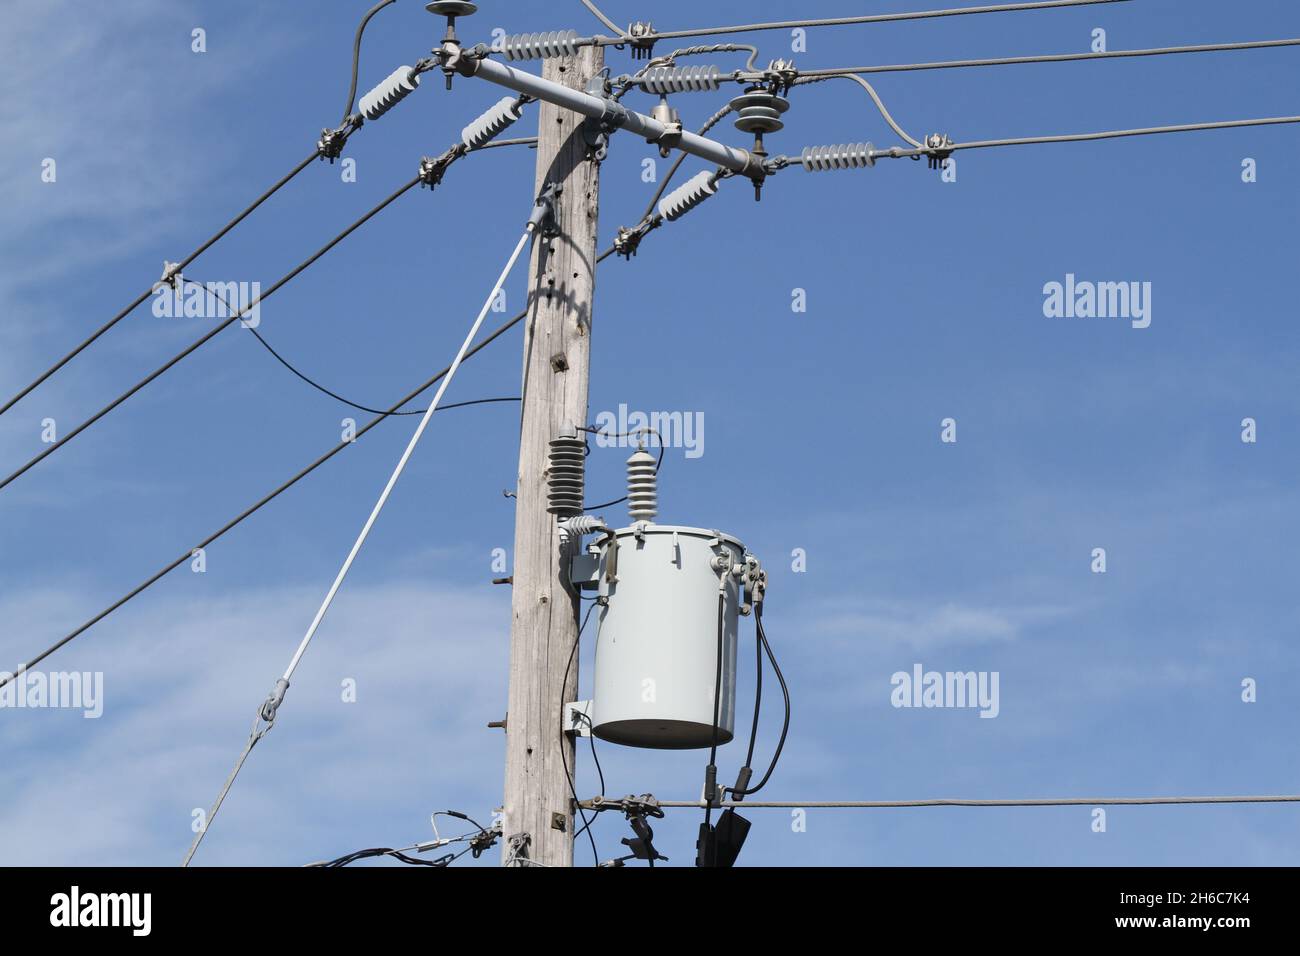 Electrical high voltage power line and electrical drums on wood pole Stock Photo